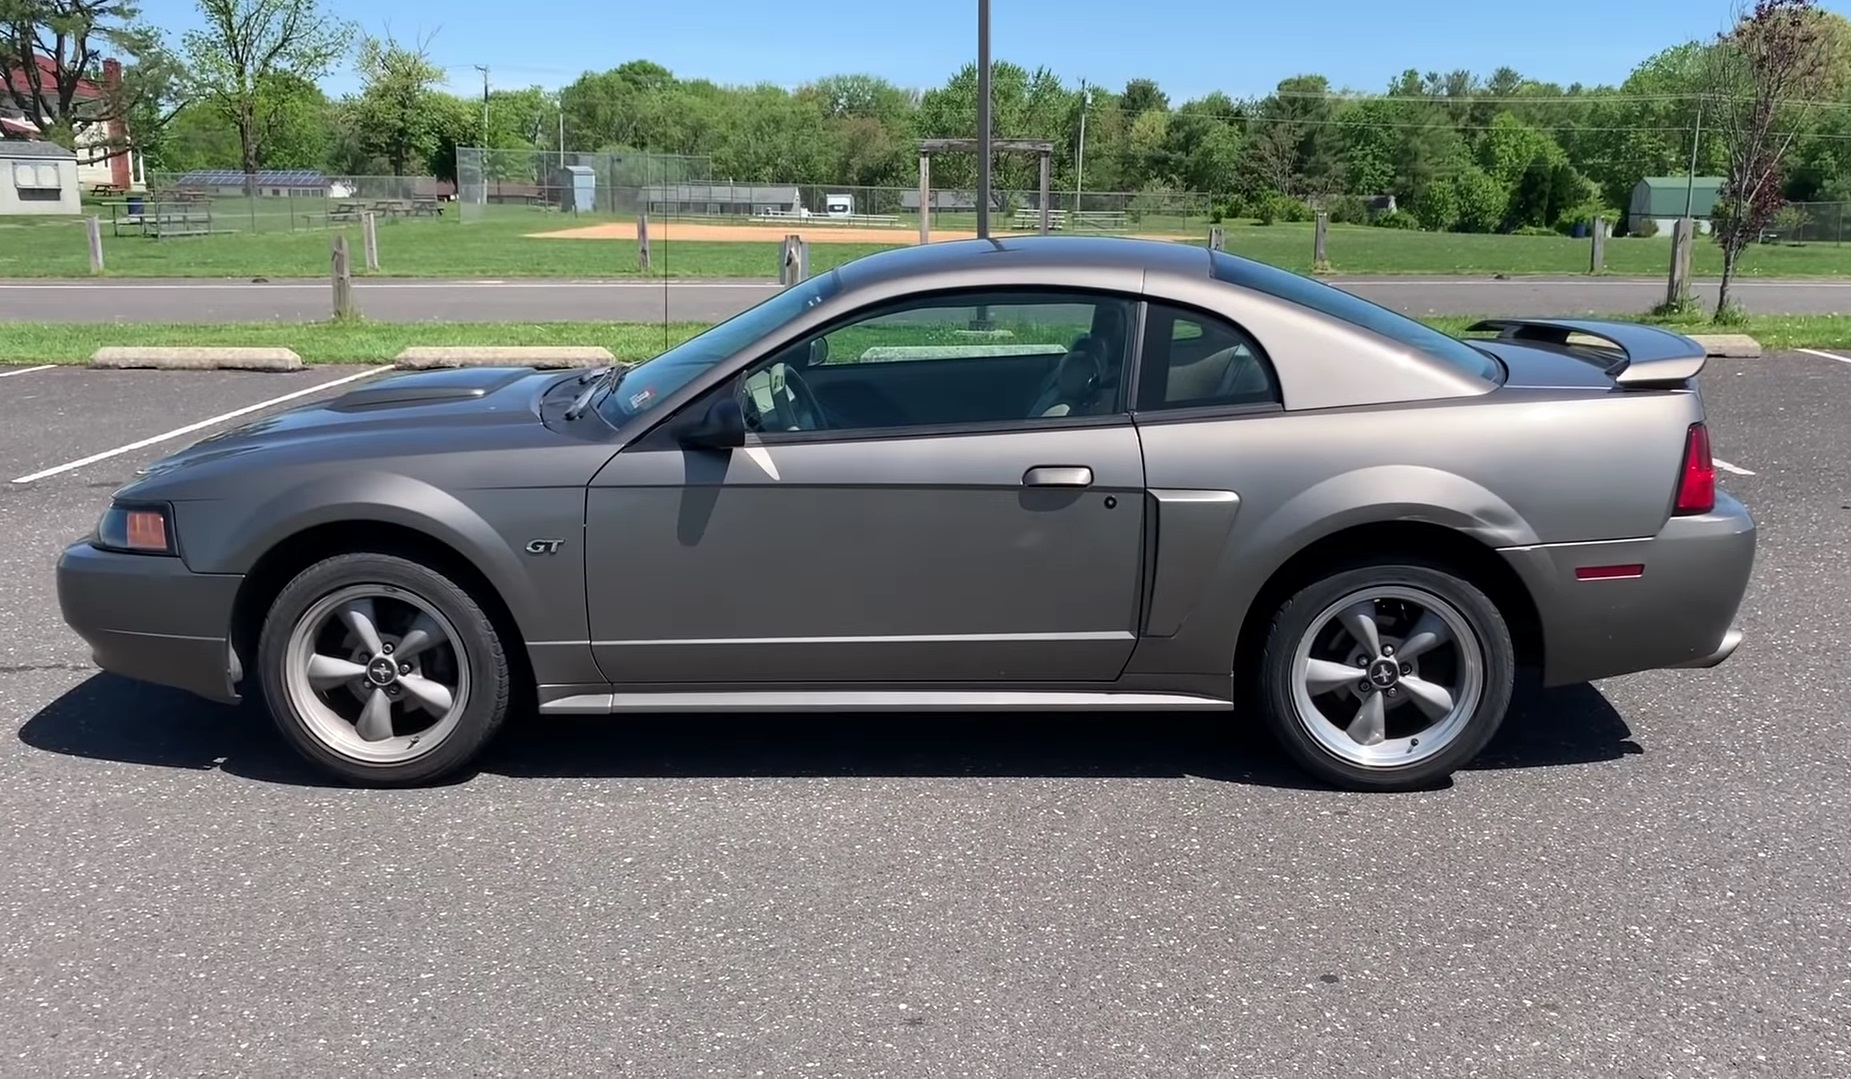 :Video: What Makes The 2002 Ford Mustang GT Special?